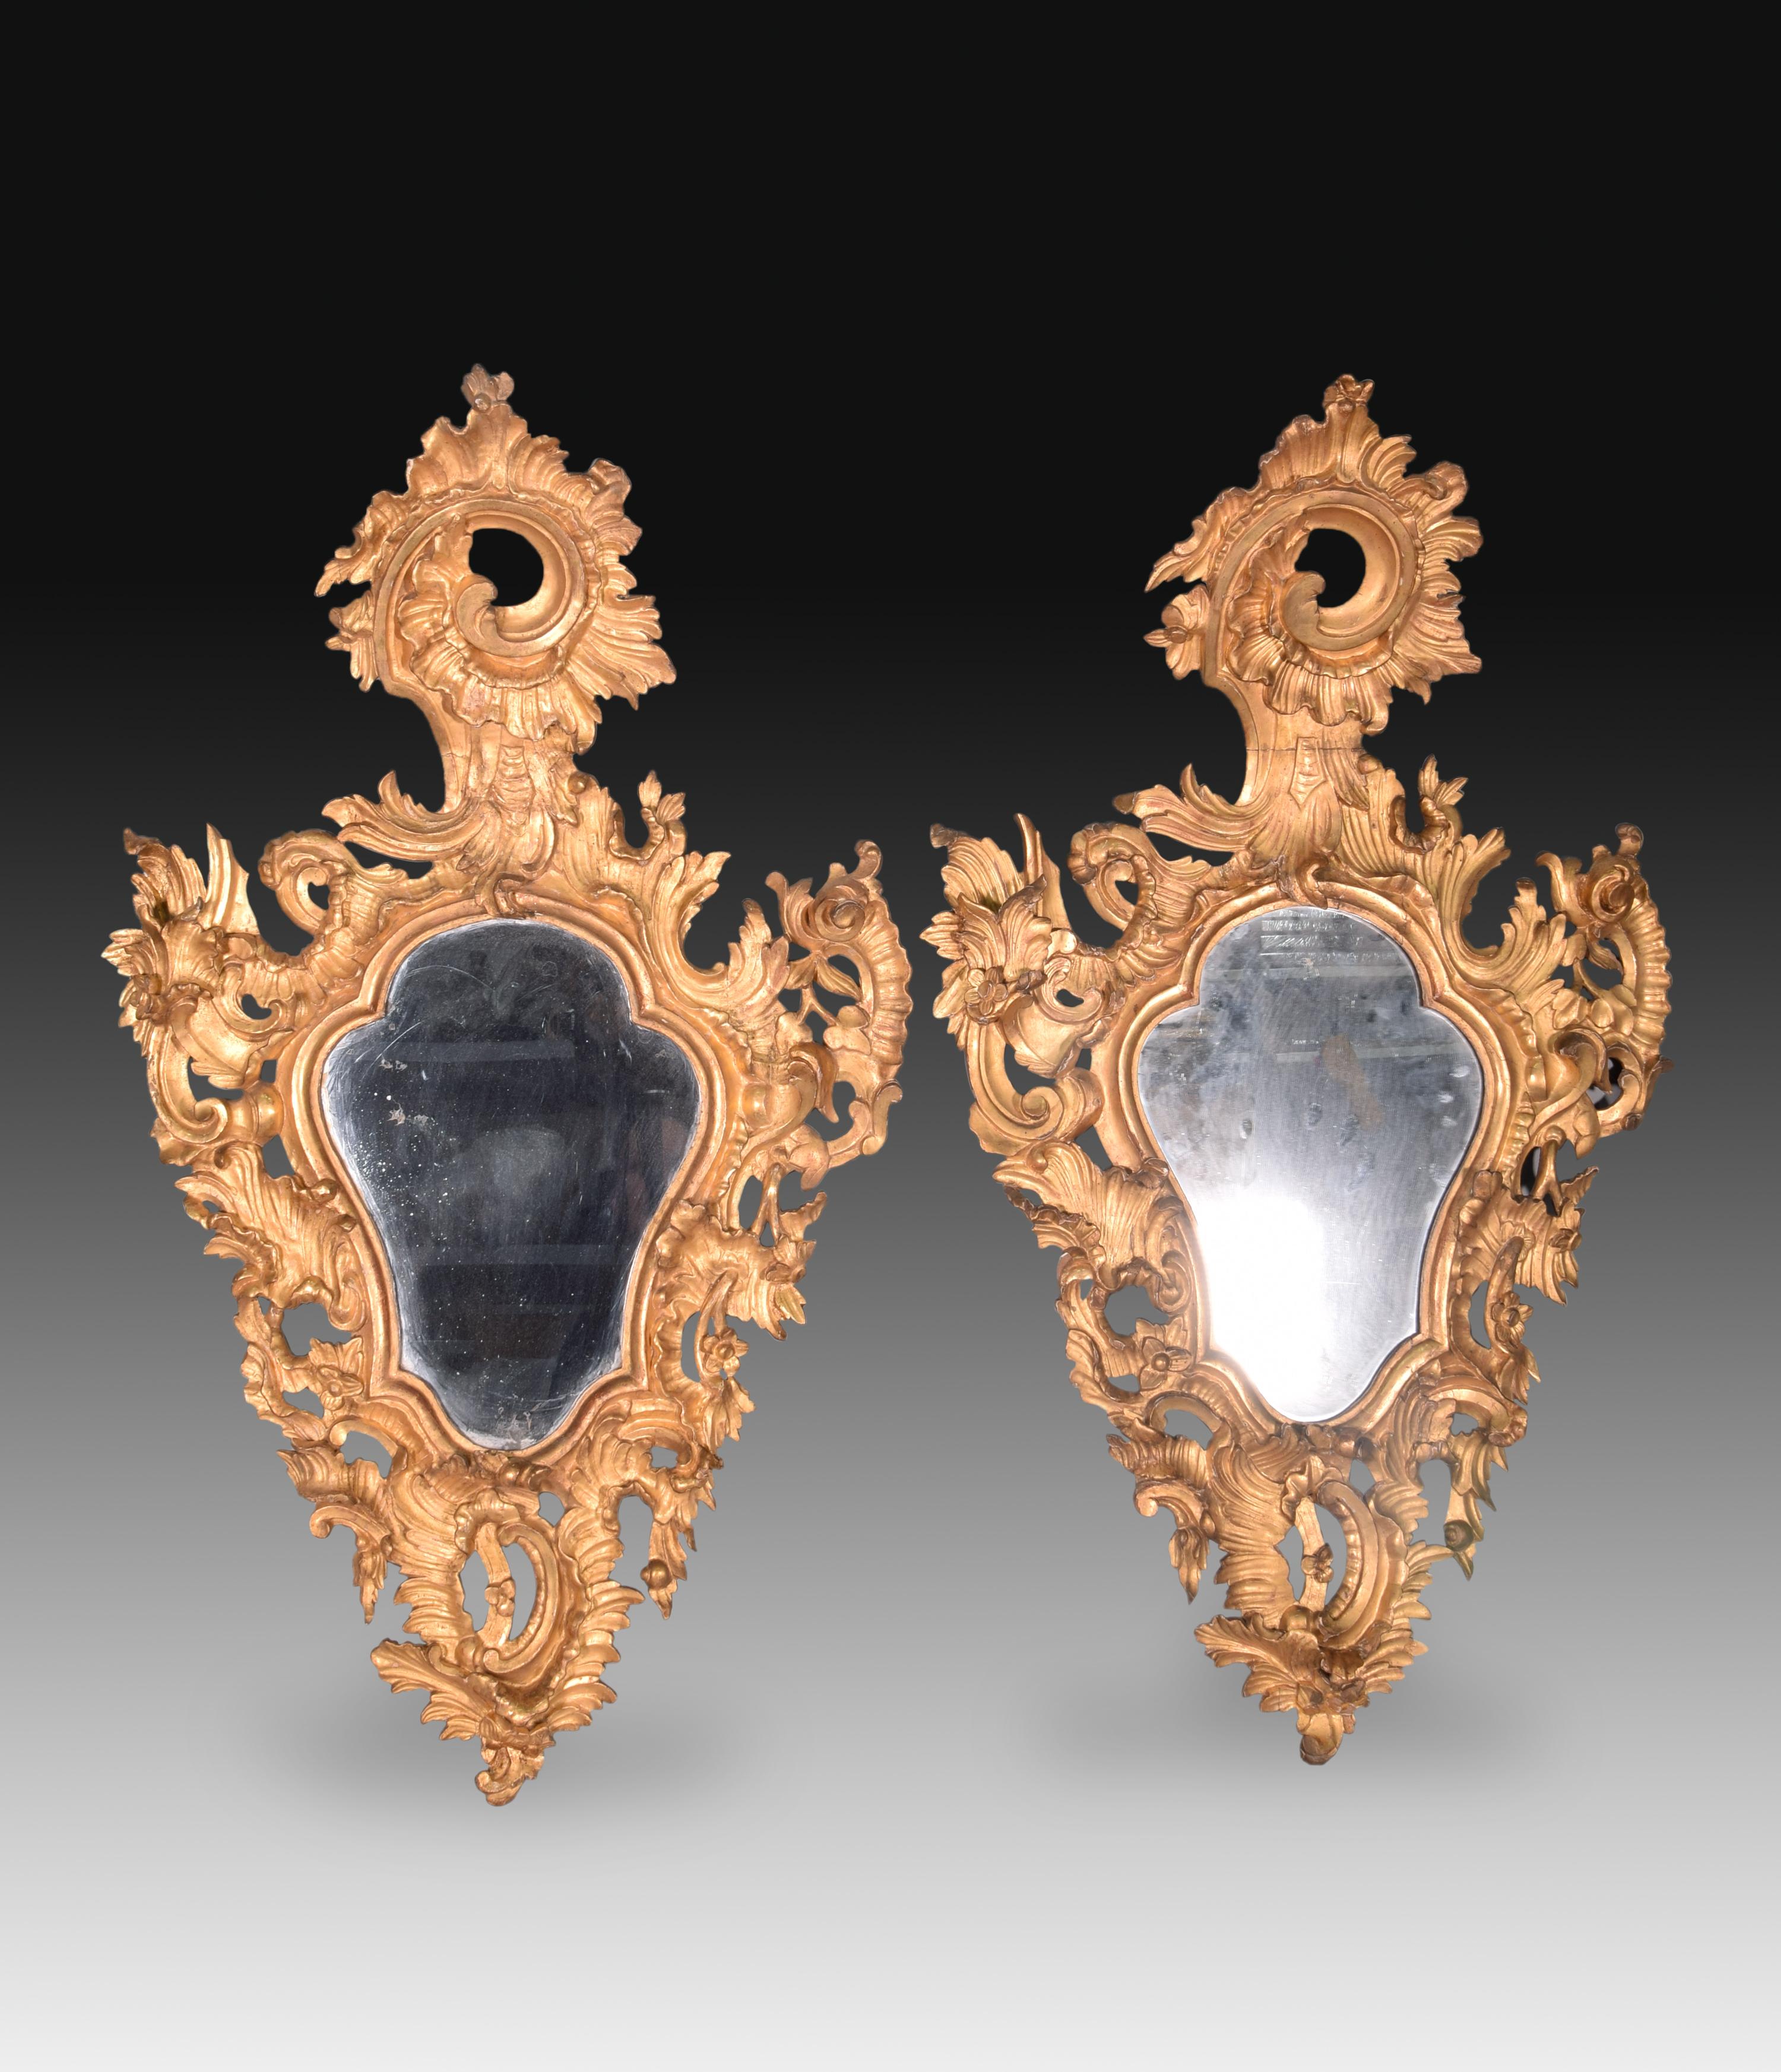 This type of works were only made for main houses, since their main use was to reflect the light of candles and lamps in these luxurious interiors, also showing the economic power of their owners. The method of making mirrors from sheets of glass